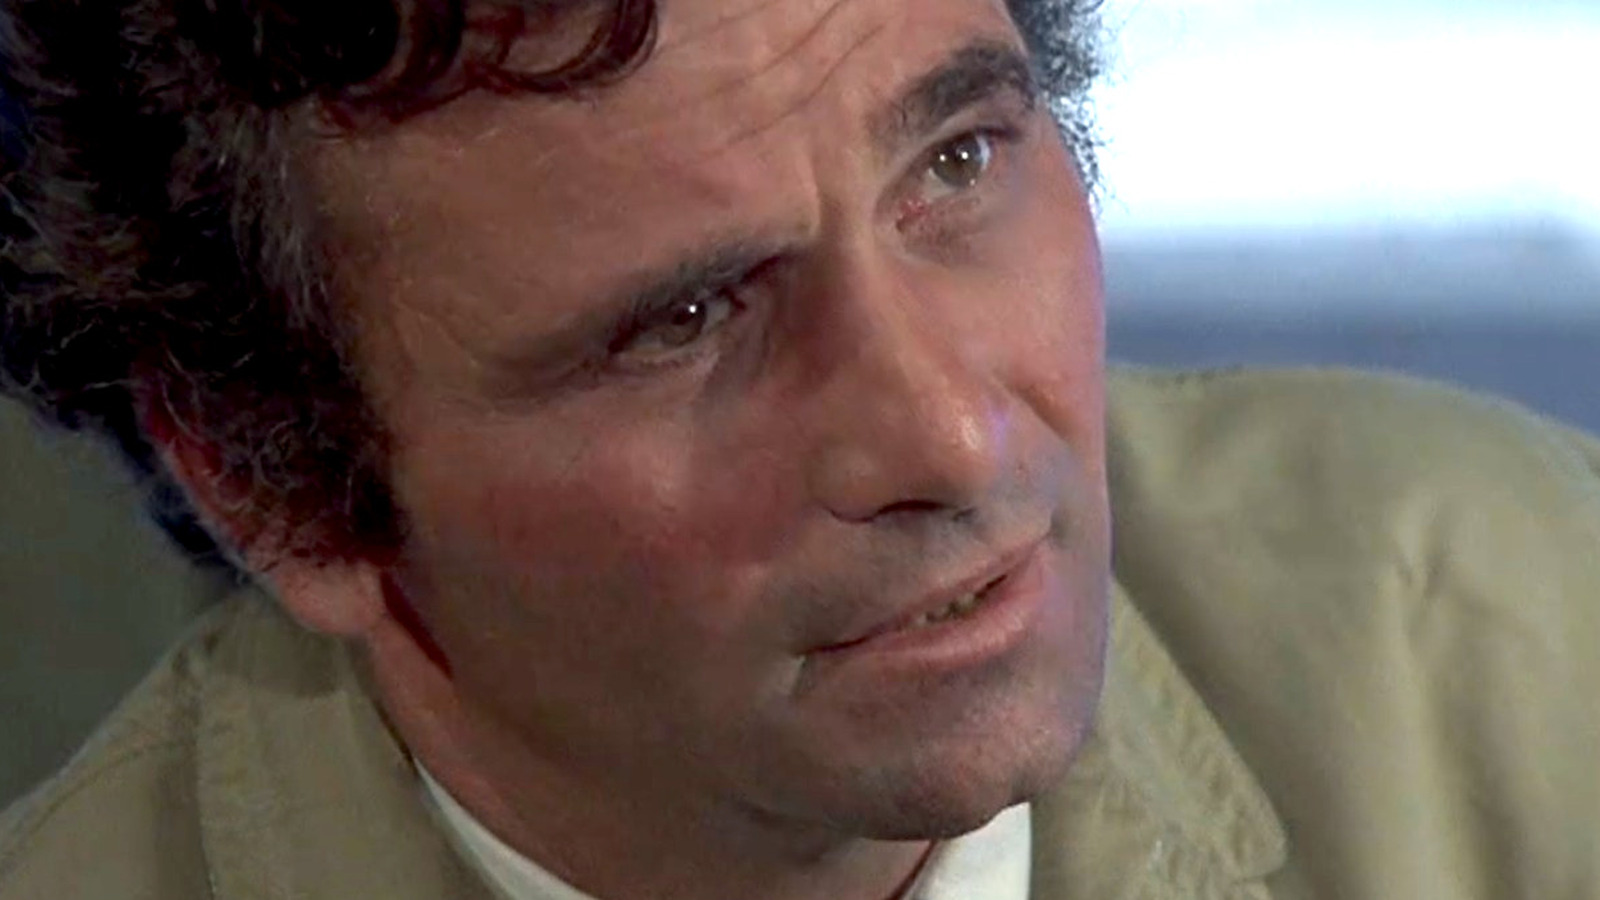 Peter Falk, best known for playing the title role on Columbo in